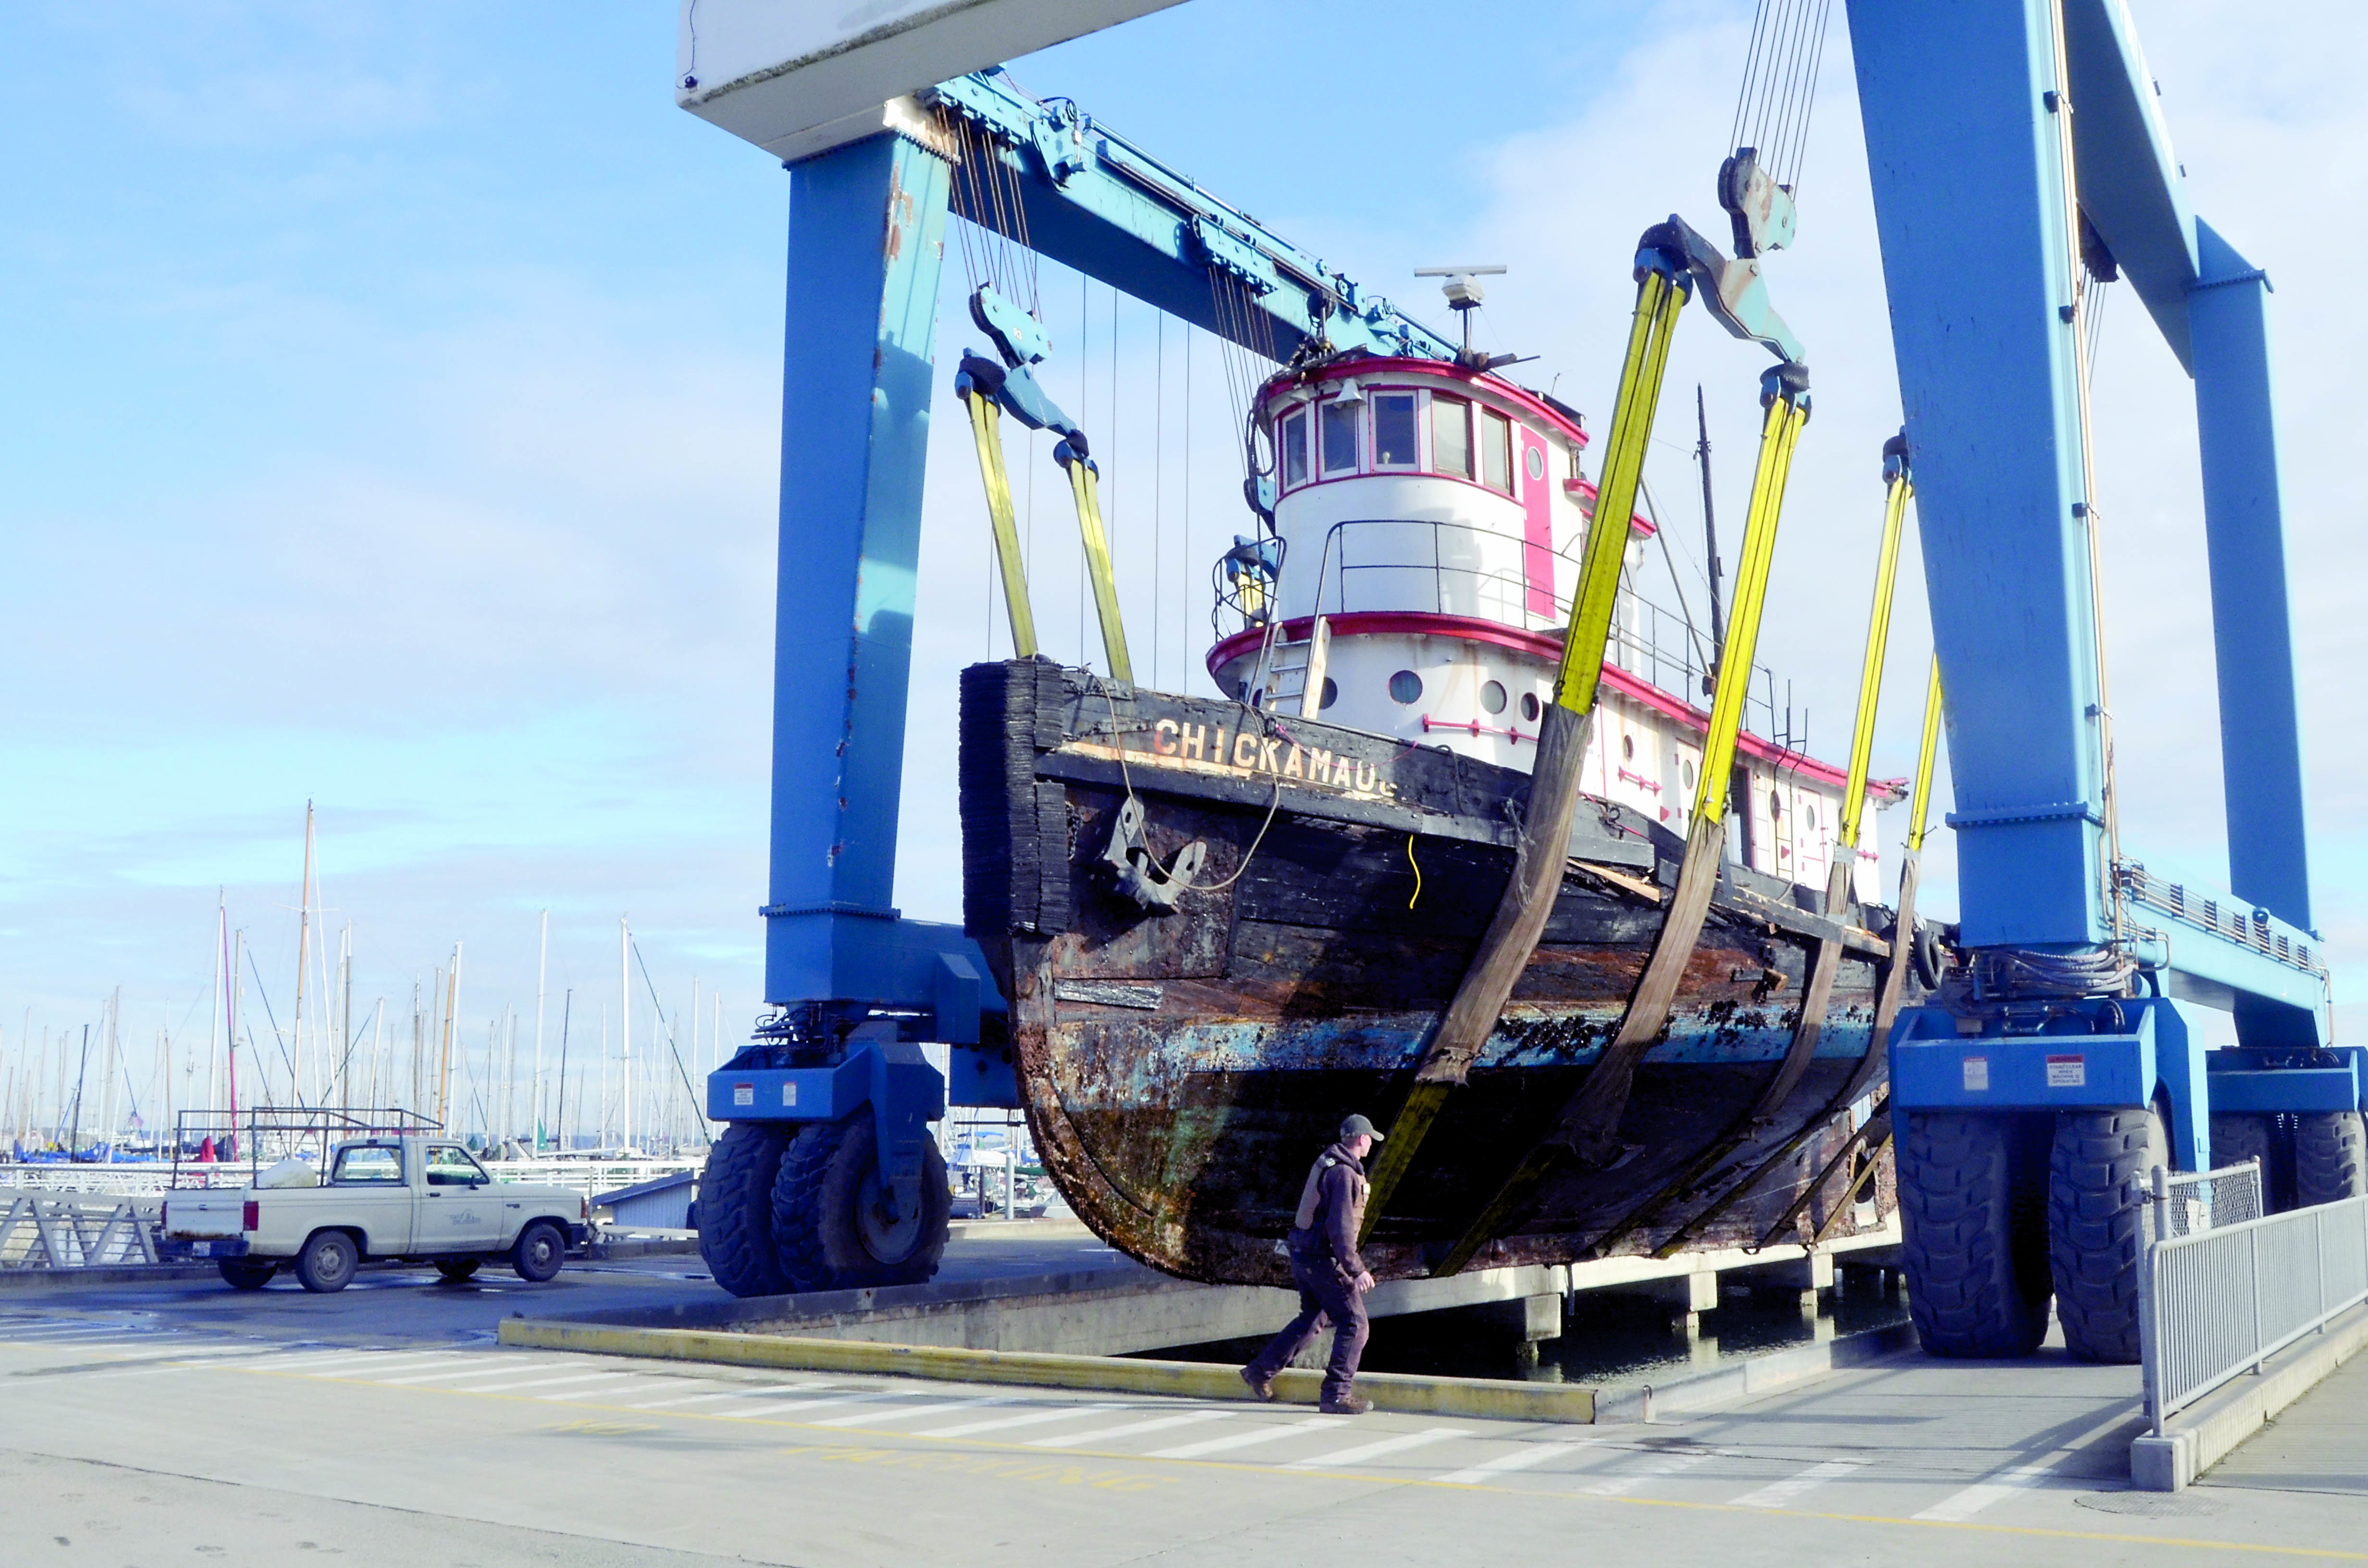 The 100-year-old tugboat Chickamauga is brought into the Port Townsend Boat Haven earlier this month. — Charlie Bermant/Peninsula Daily News